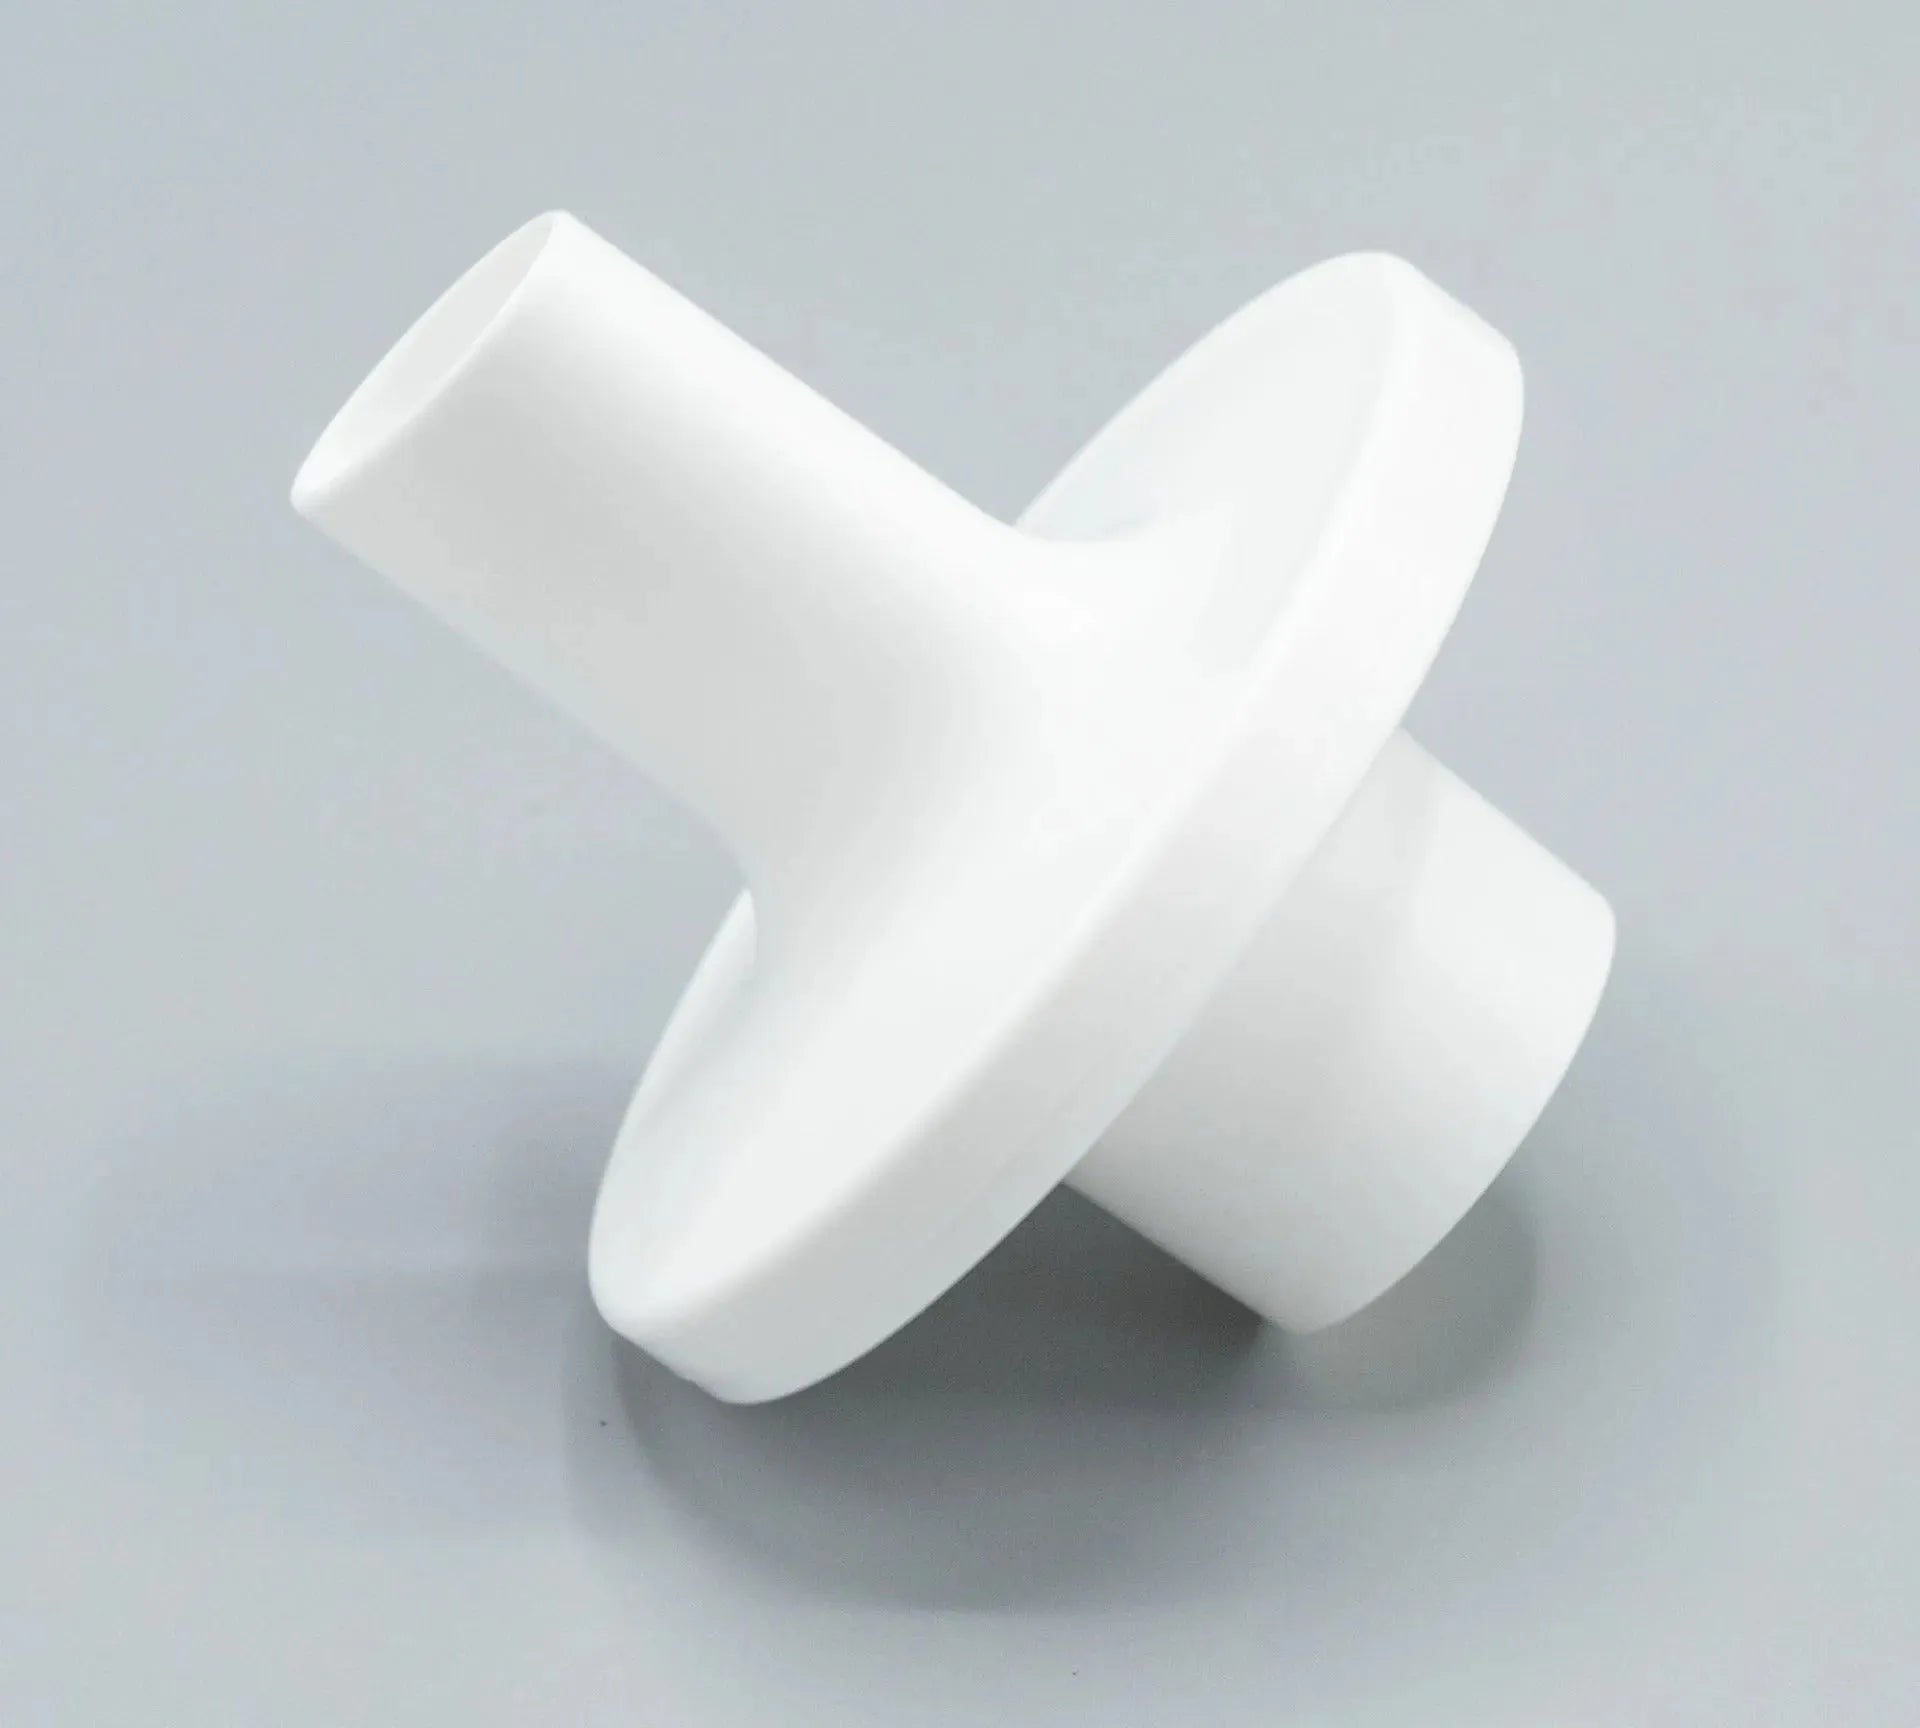 The Morgan Elliptical (BVF) bacterial/ viral filter mouthpiece is elliptical in shape, and white in color.